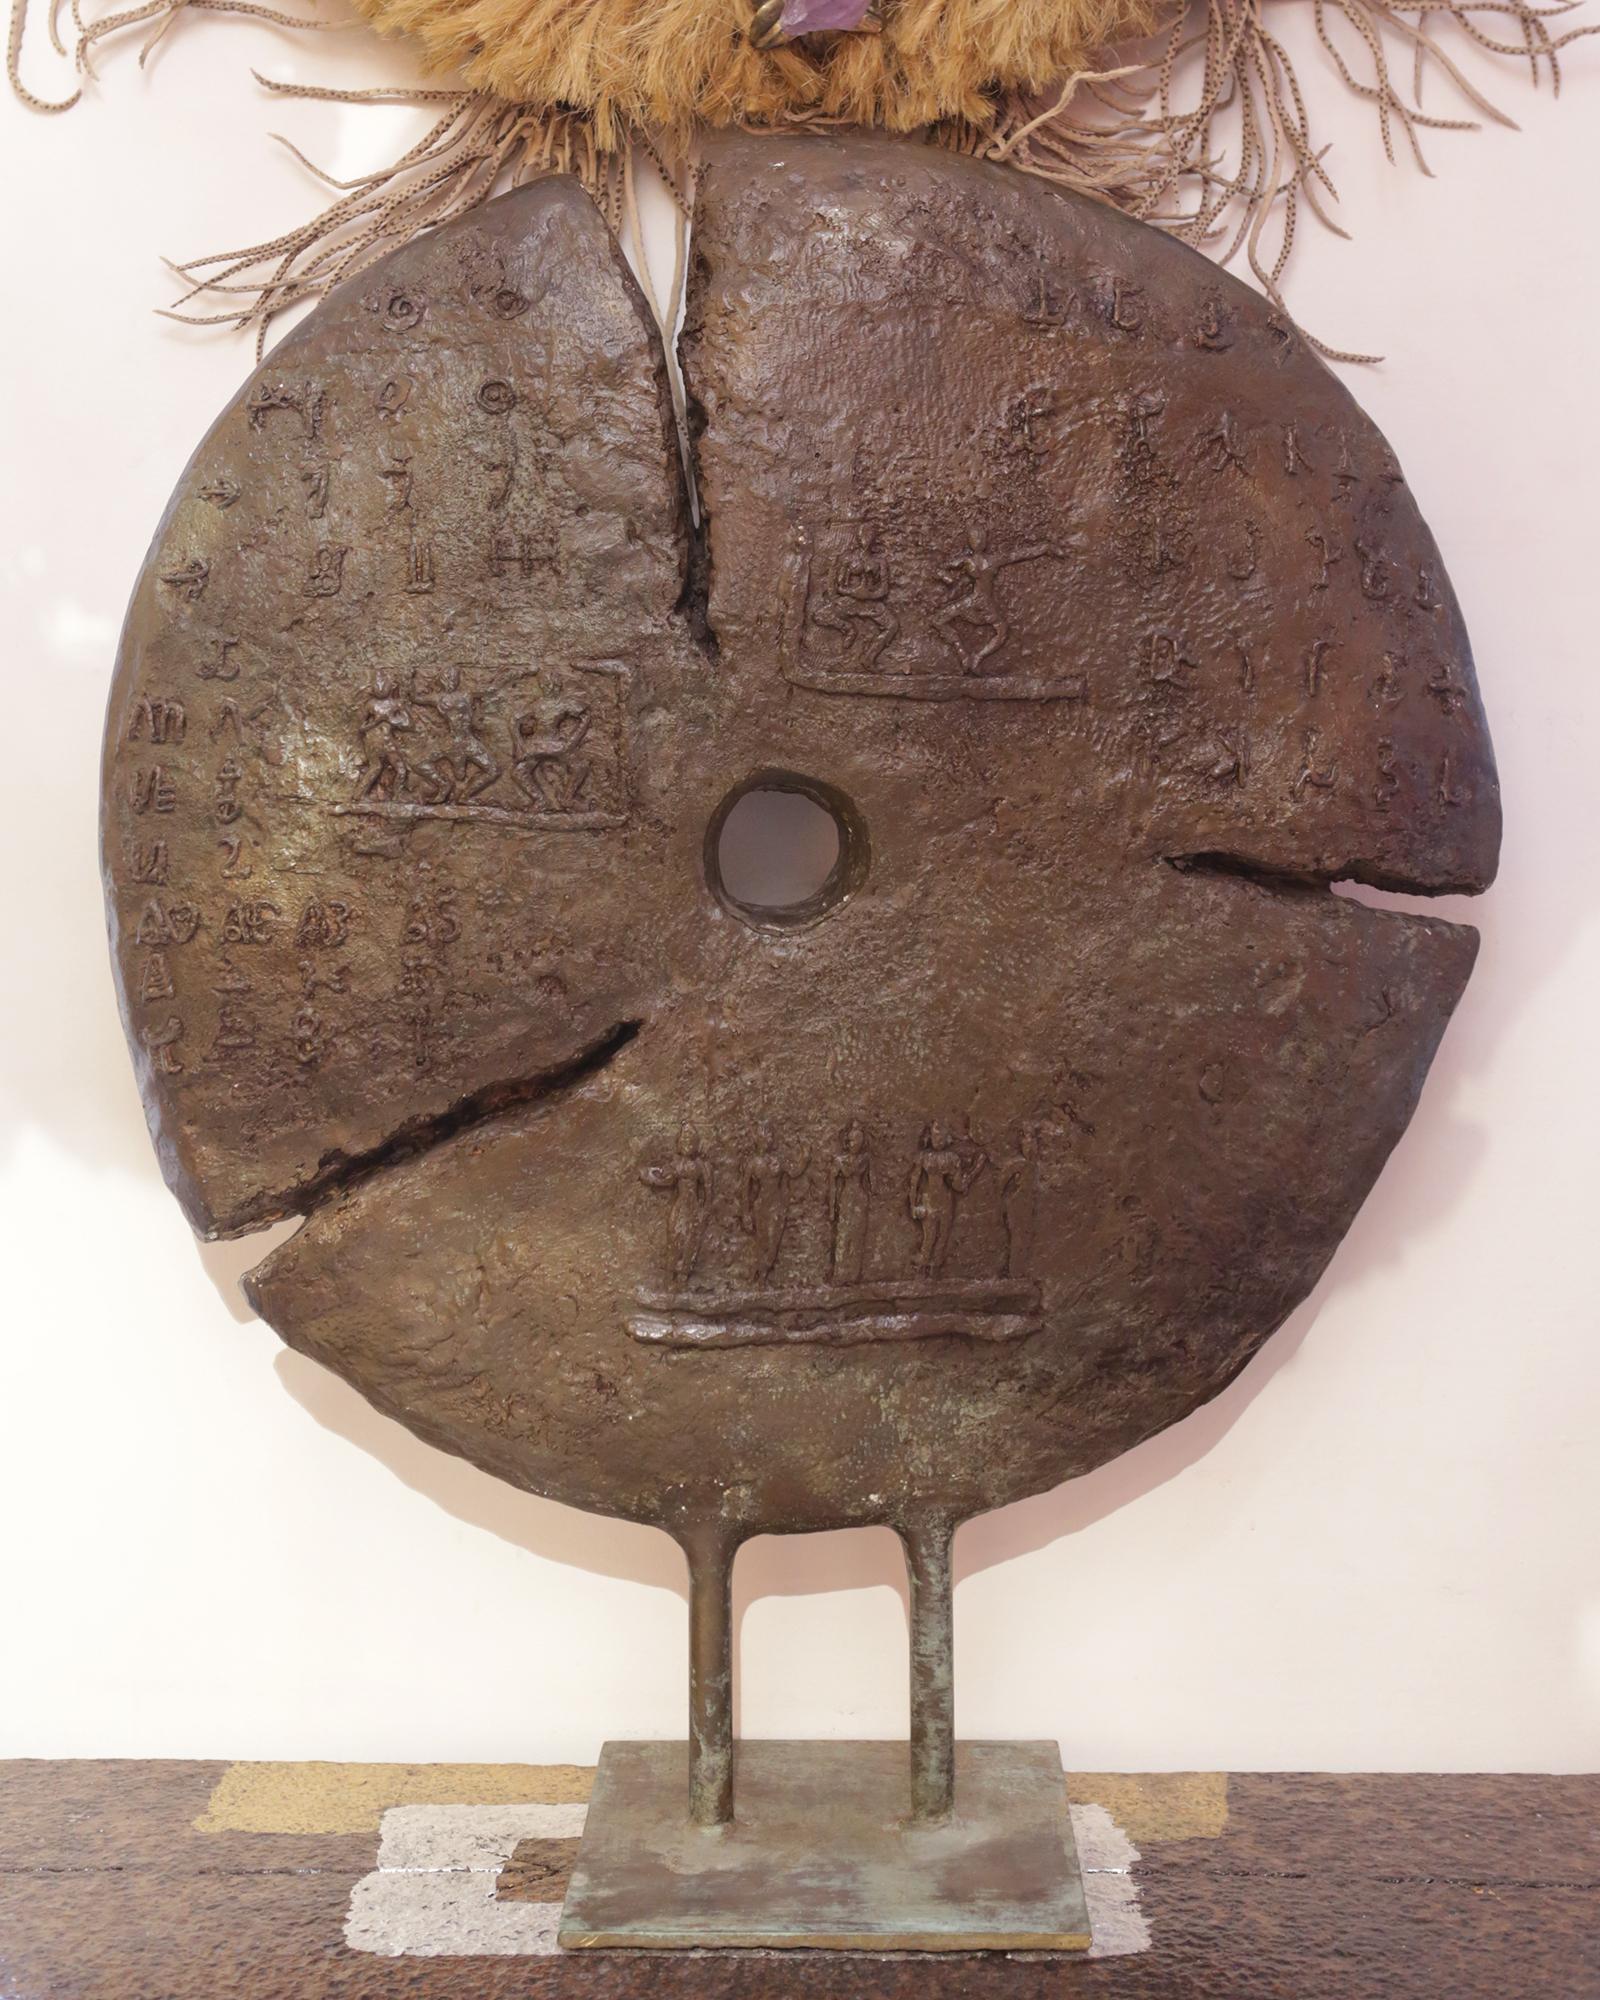 Sculpture bronze discus with varnished finish,
with embossed characters representing the joy
of life and with embossed tribal symbols.
Exceptional piece made in France in 2016.